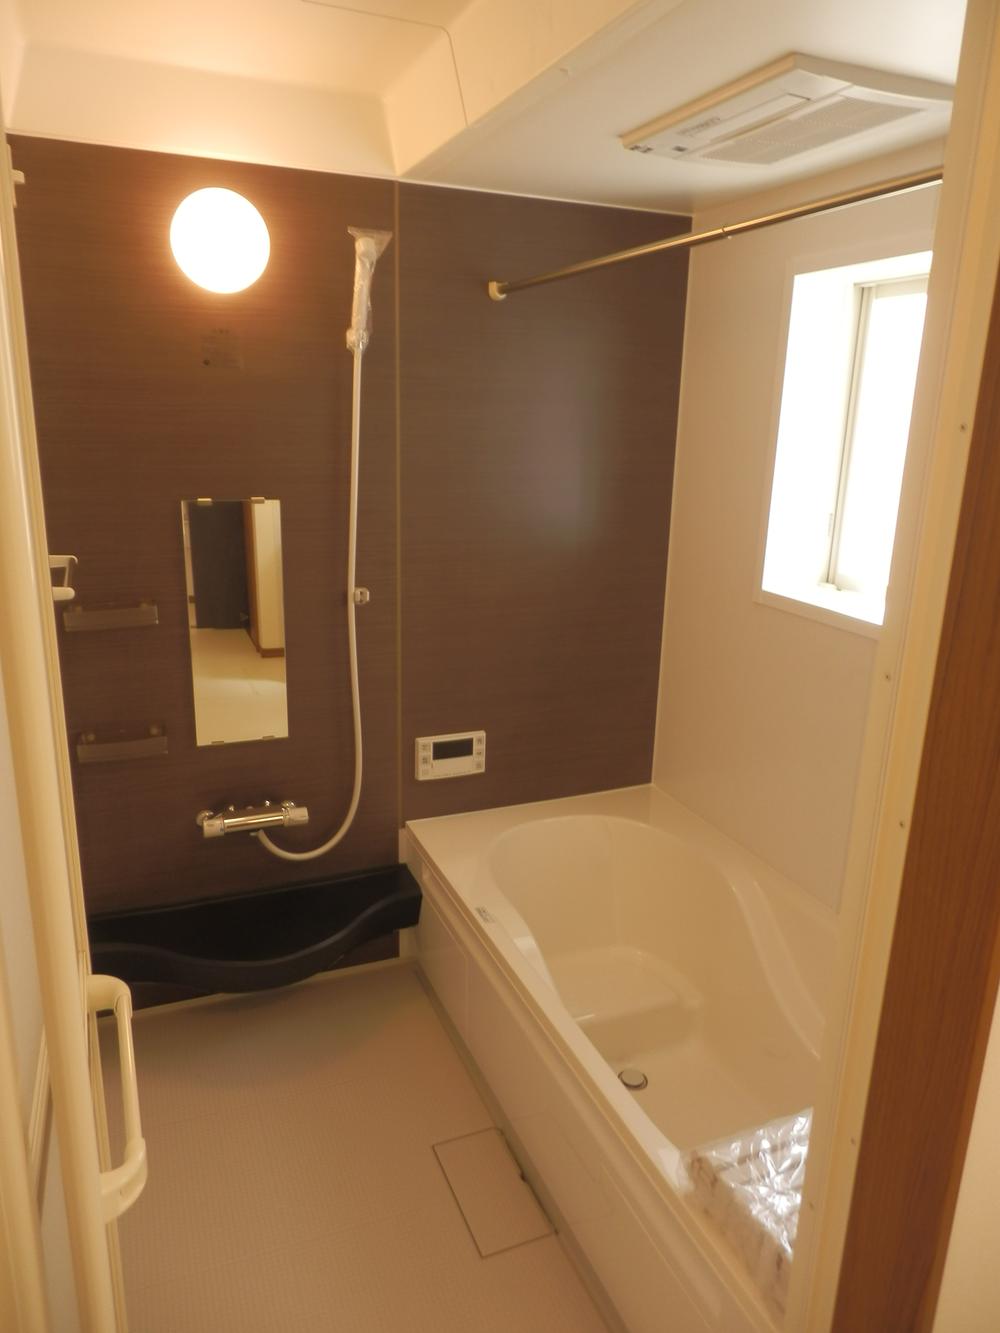 Other Equipment. Plasma cluster mounted, Bathroom Dryer, Is adopted stain-resistant clean floor. Kururin poi drainage port, Hot water is hard to cool down in comfortably wrapped bathtub with a heat insulating material. 